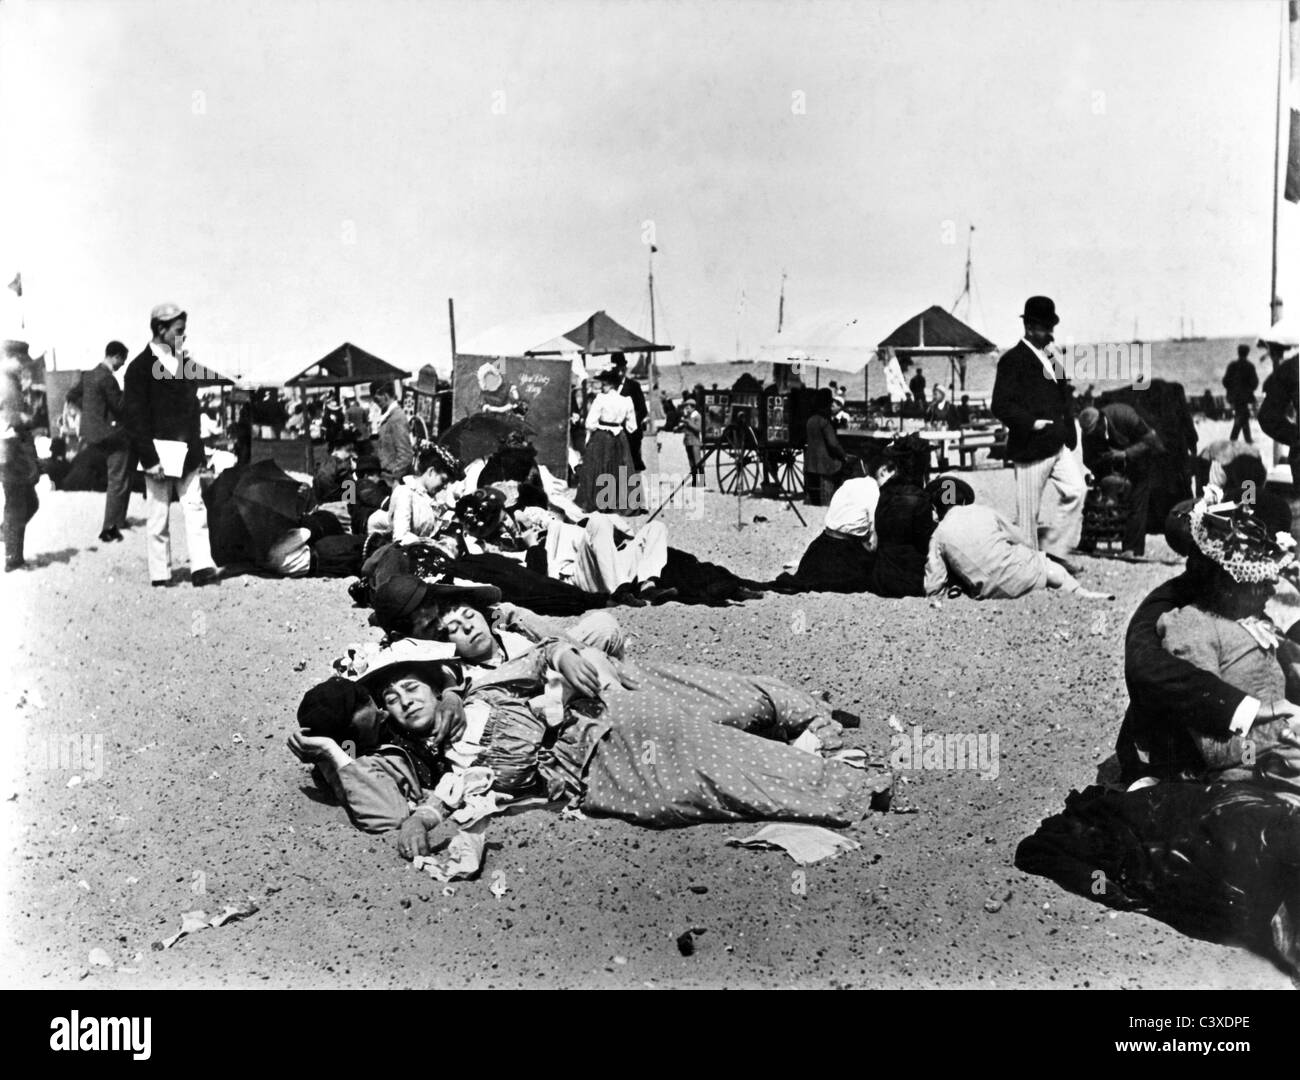 Yarmouth, sables bitumineux photo Paul Martin.Yarmouth Sands, Angleterre, fin du 19e siècle Banque D'Images